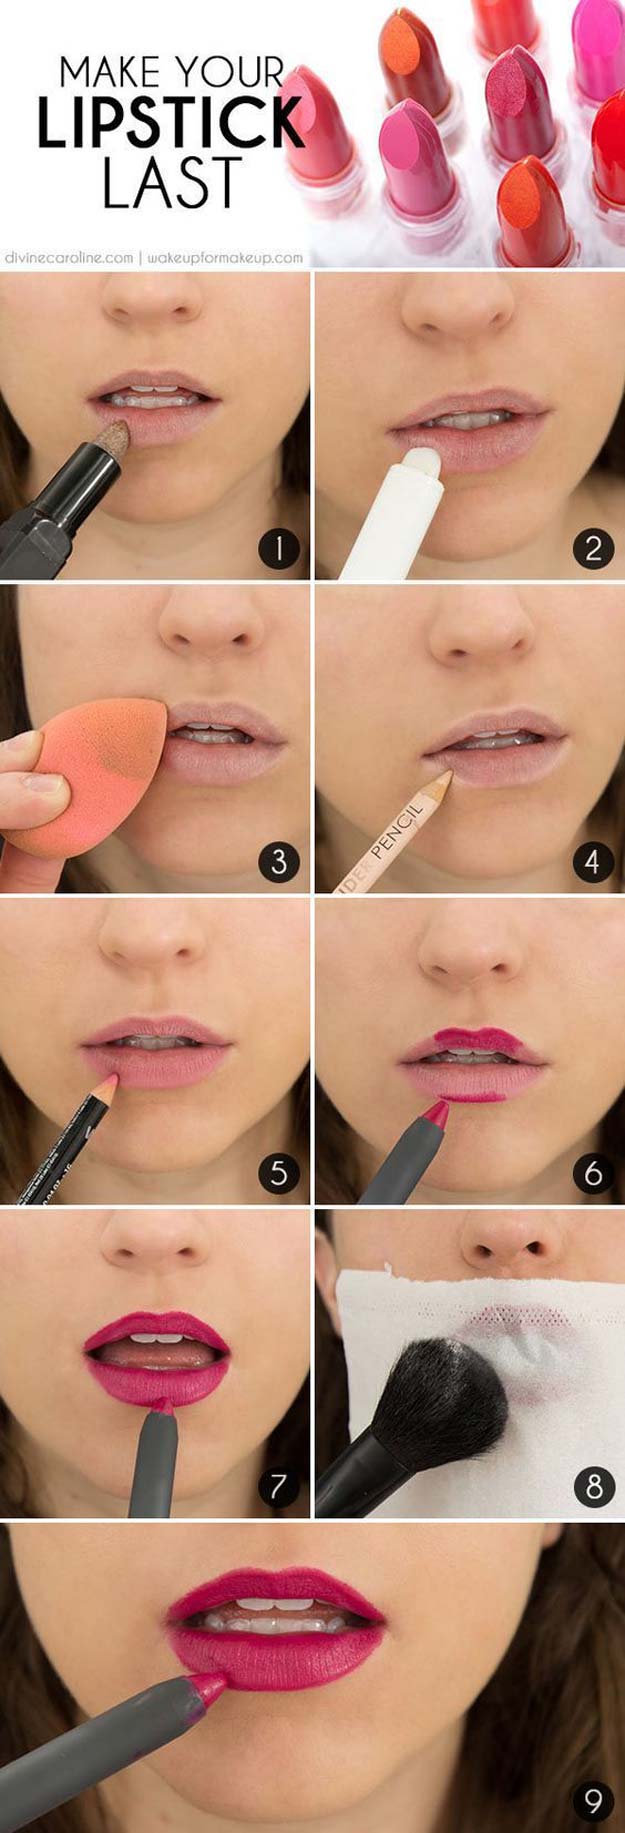 Here Are 30 of the Best Lipstick Tutorials Ever!